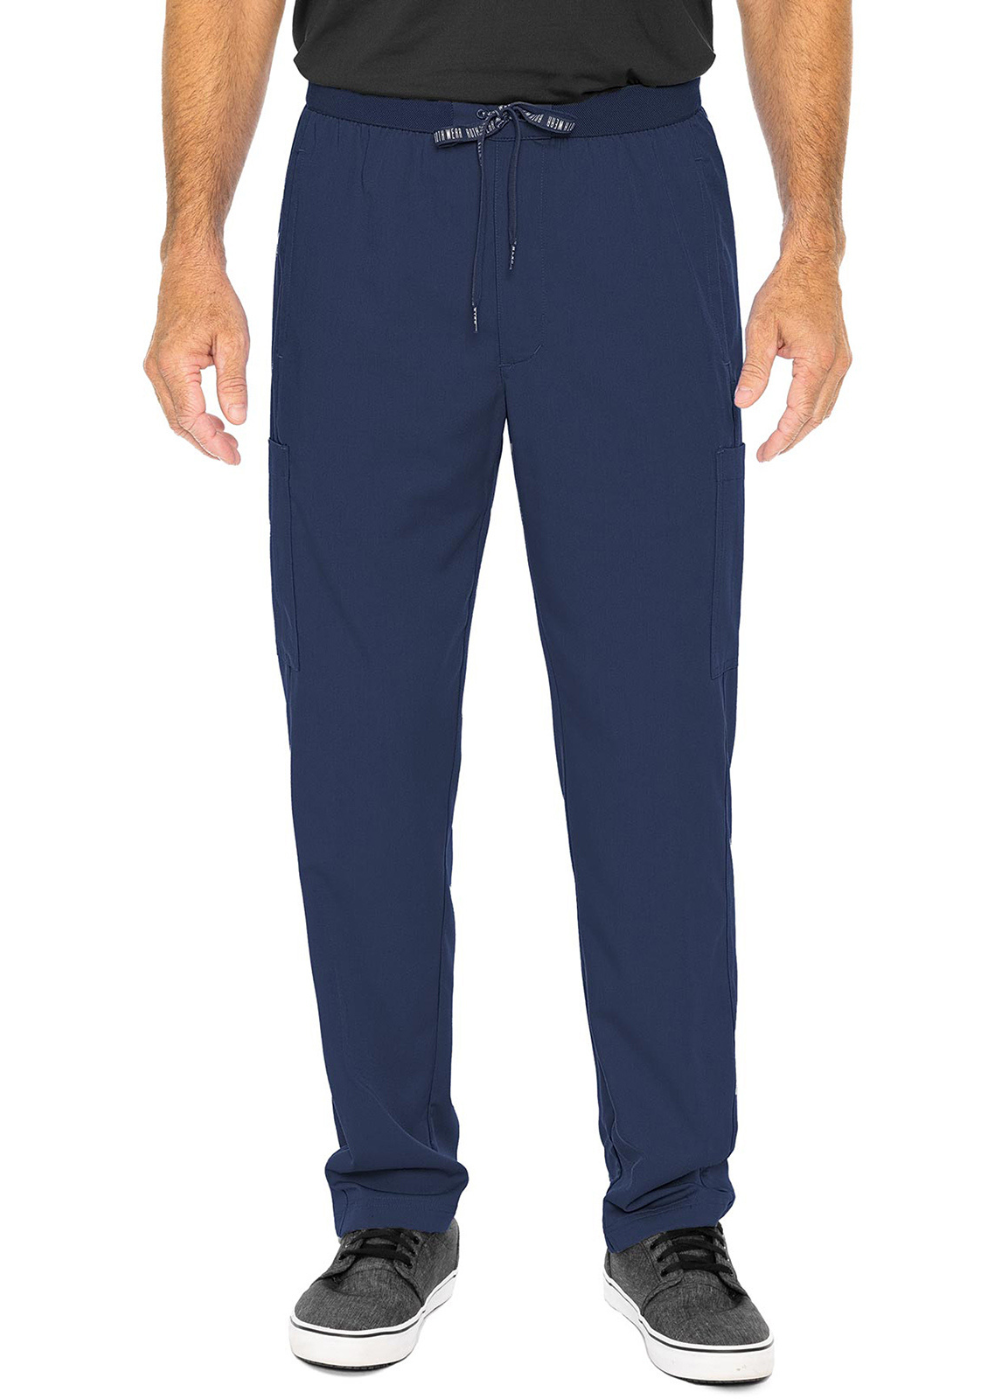 ROTH Wear Men's TOUCH 7779 Hutton Straight Leg Pant